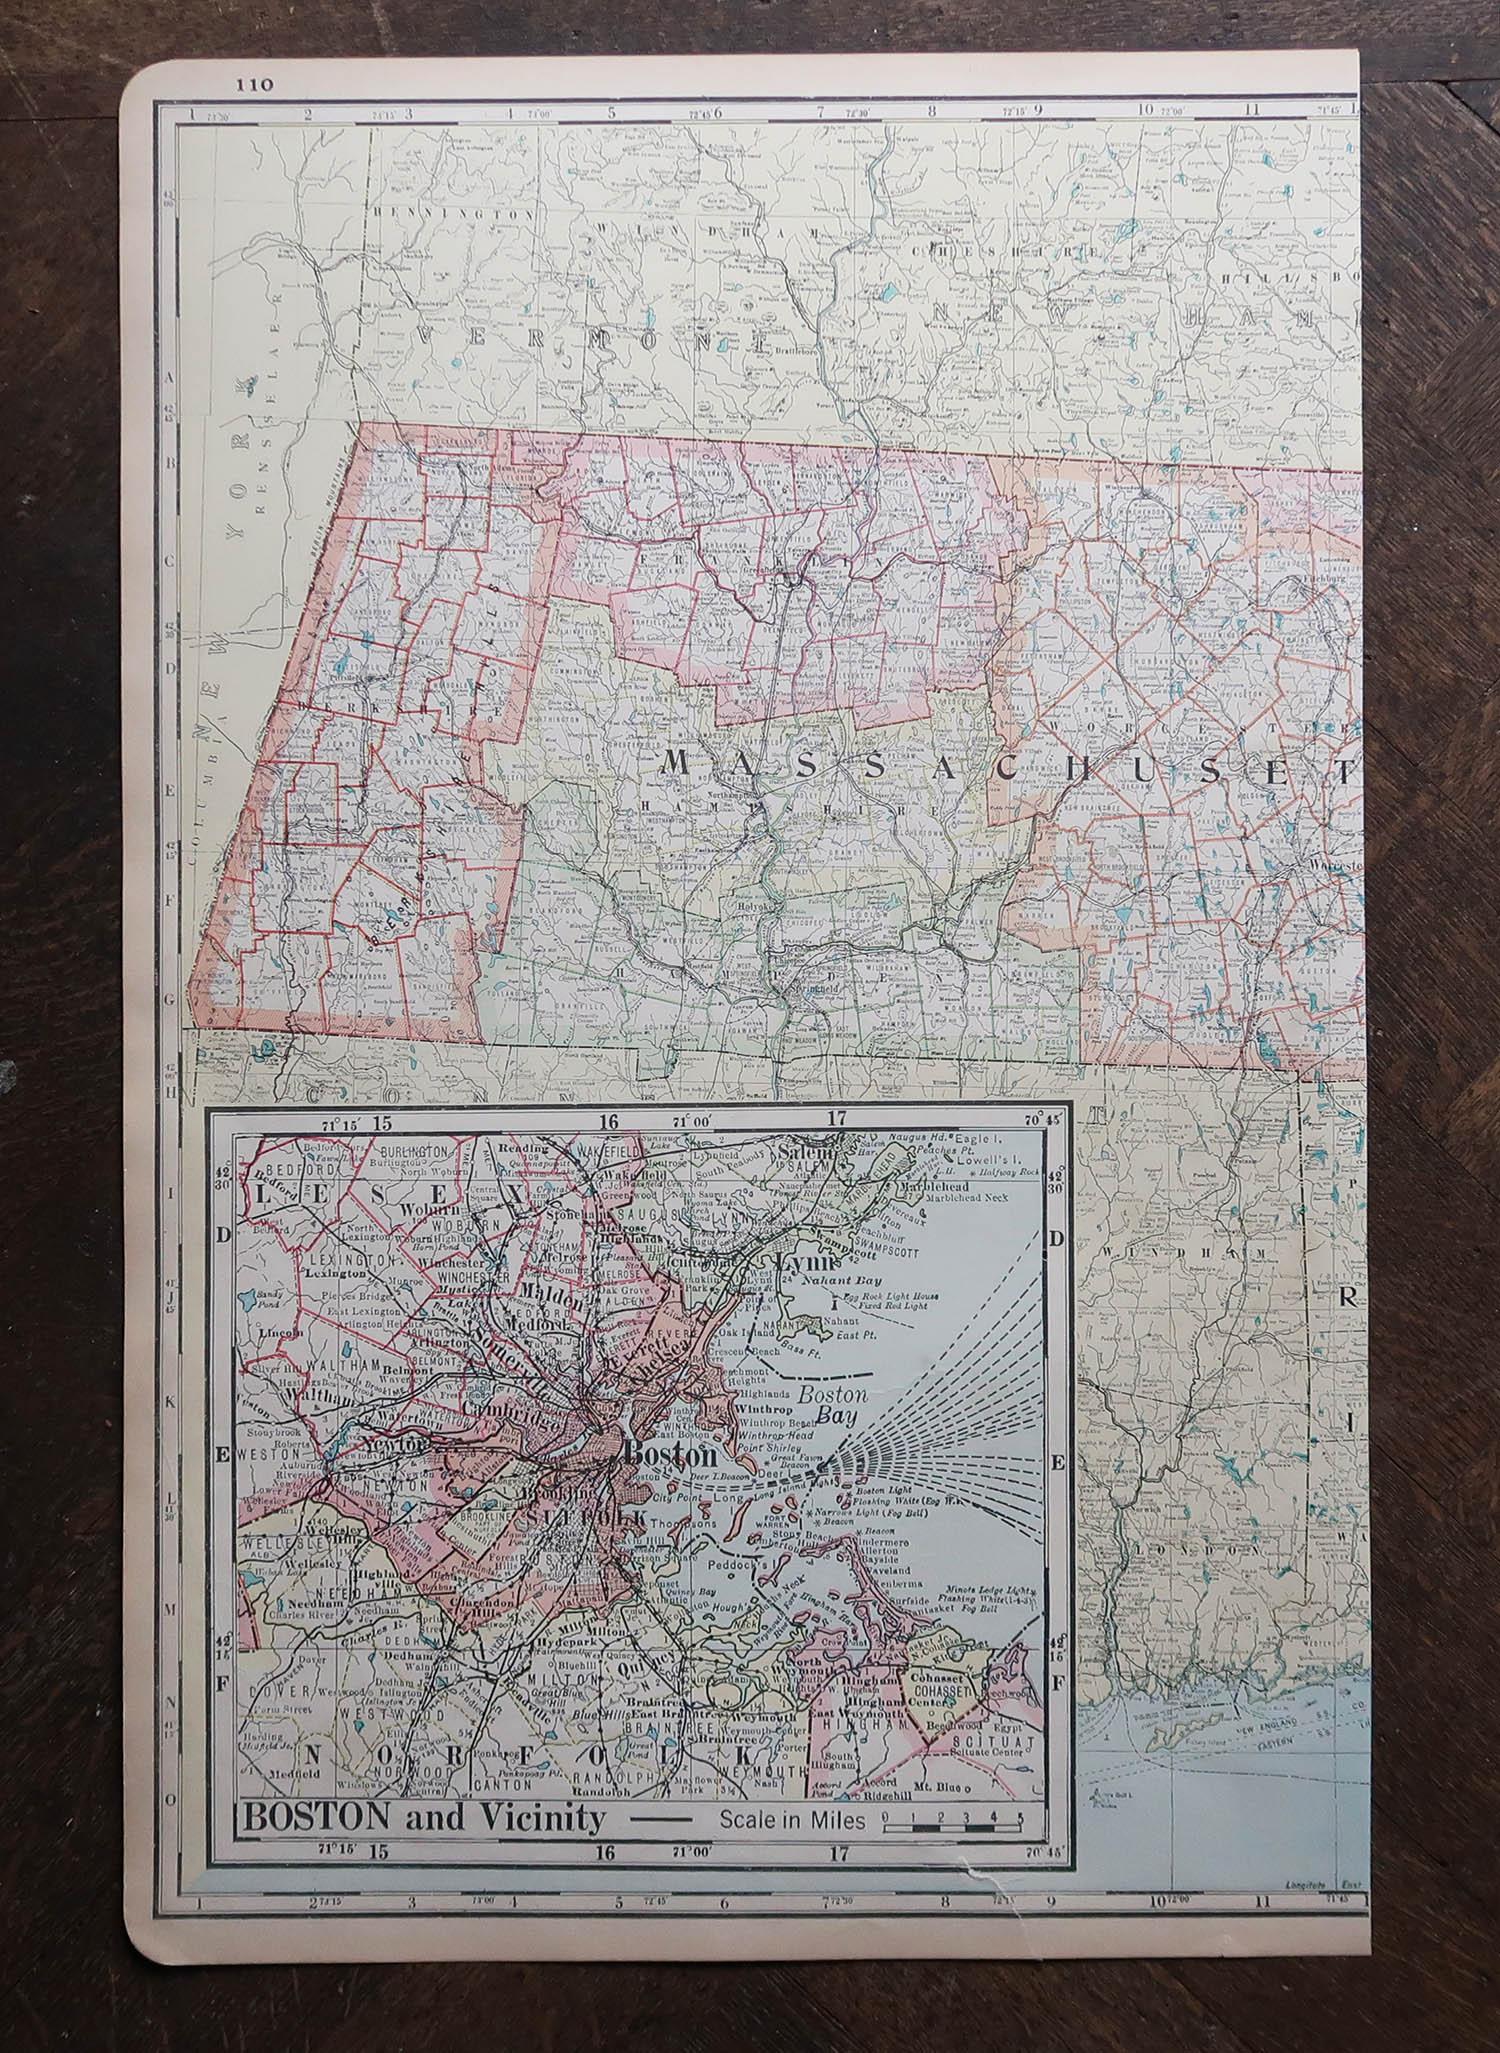 Fabulous map of Massachusetts

In 2 sheets. They can be joined but I have not done it

Original color

Engraved and printed by the George F. Cram Company, Indianapolis.

Published, circa 1900

Unframed

Repair to a tear on bottom edge shown in the